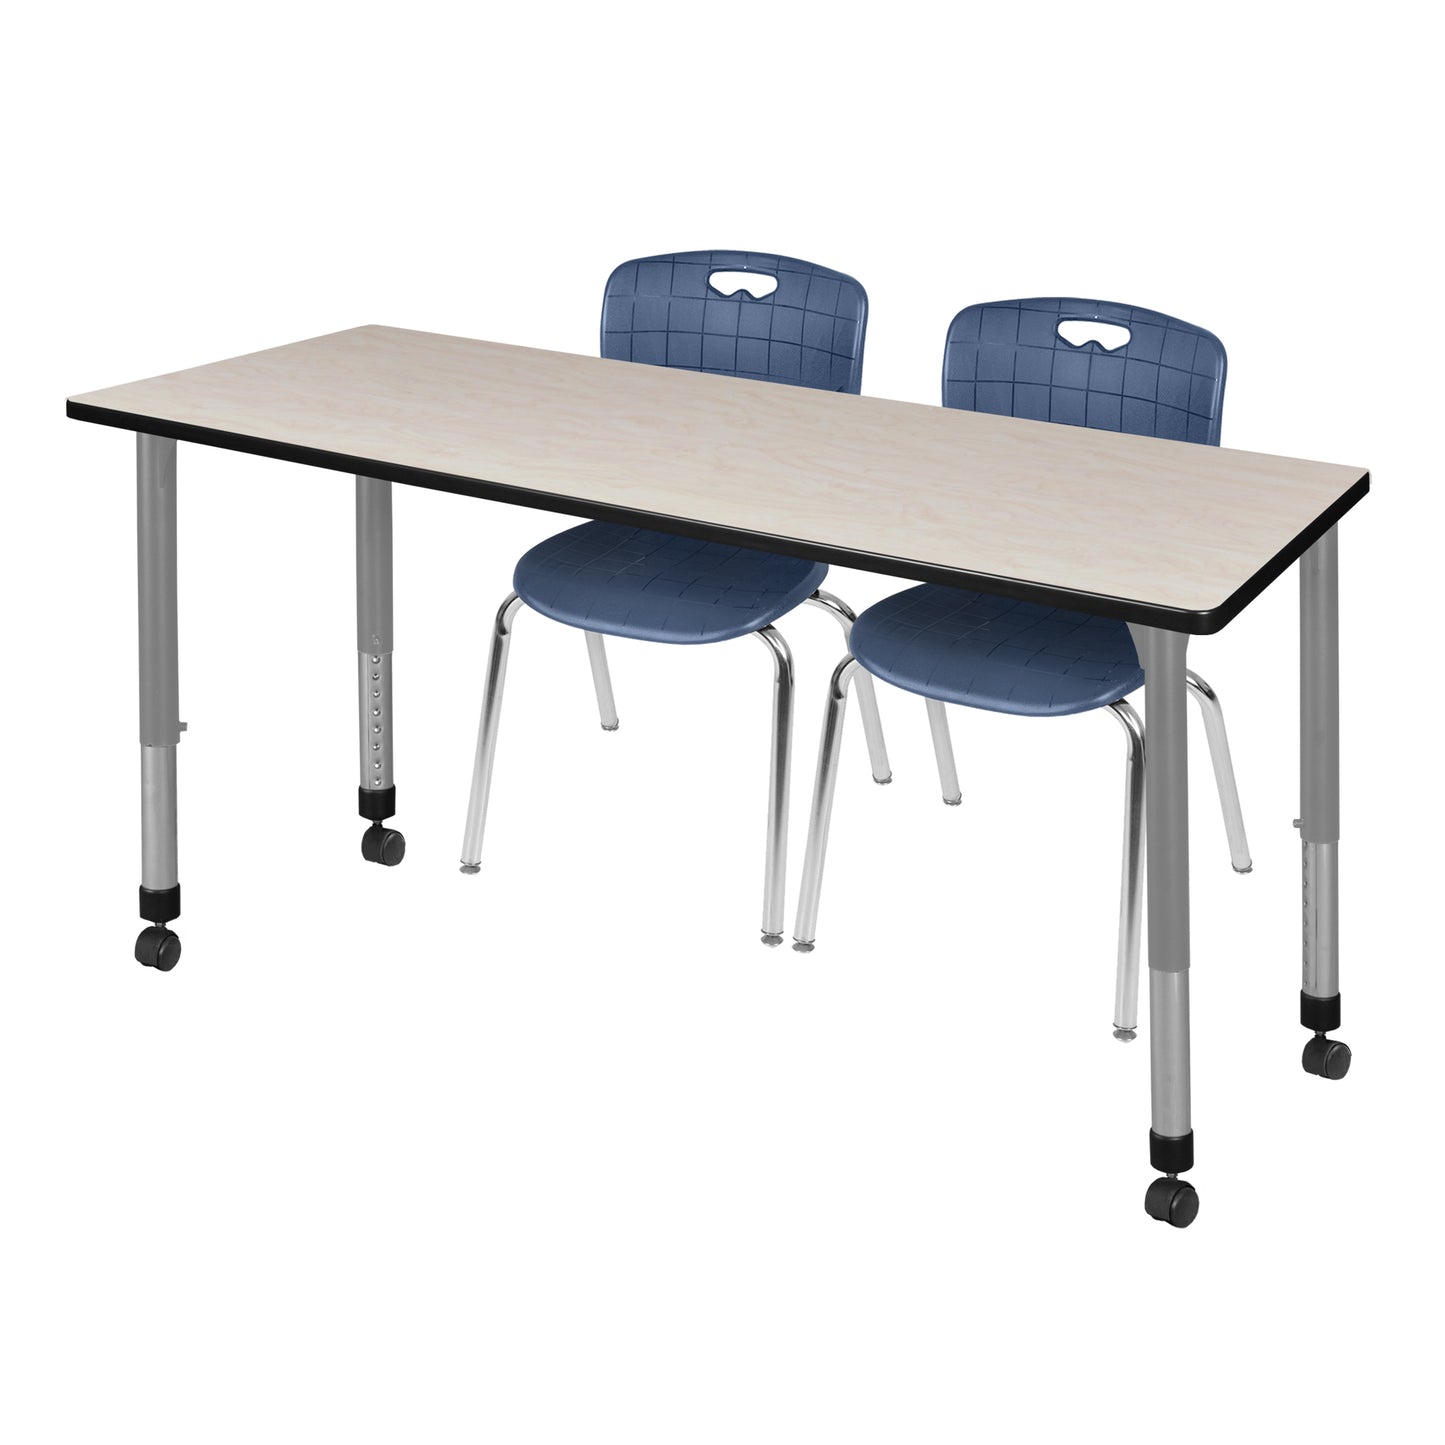 Regency Kee 72 x 30 in. Adjustable Classroom Table & 2 Andy 18 in. Stack Chairs